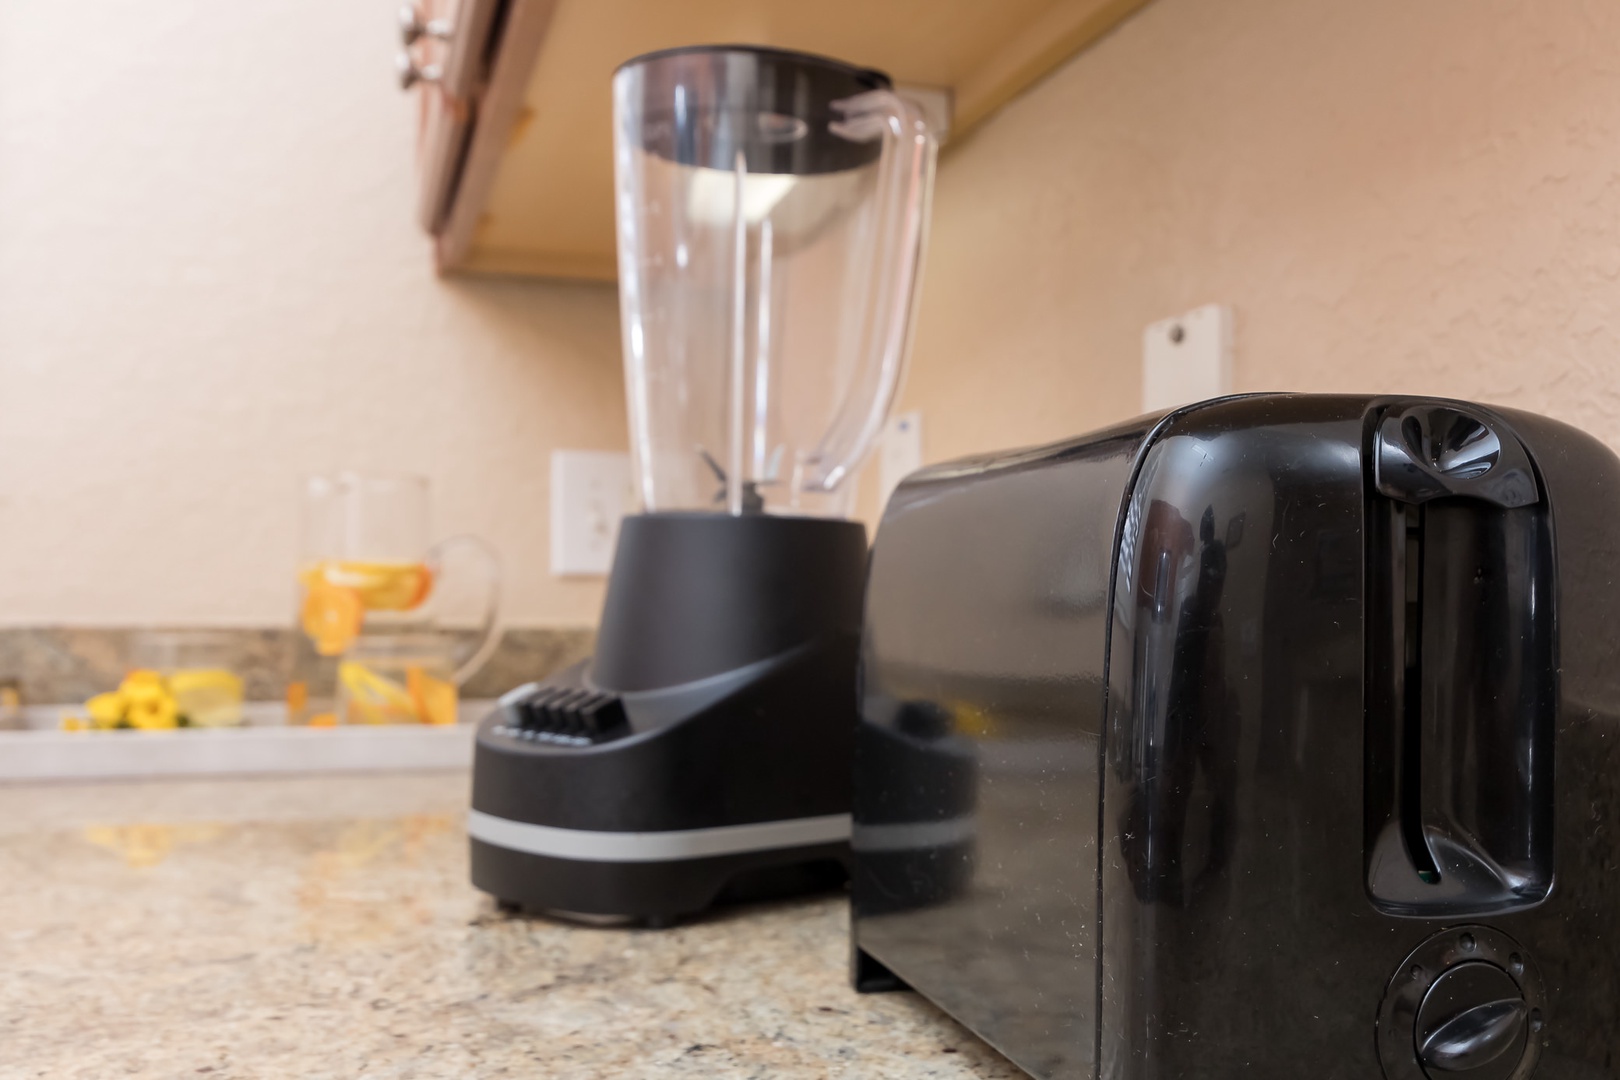 Kitchen's extra items such as a blender, toaster, and coffee maker